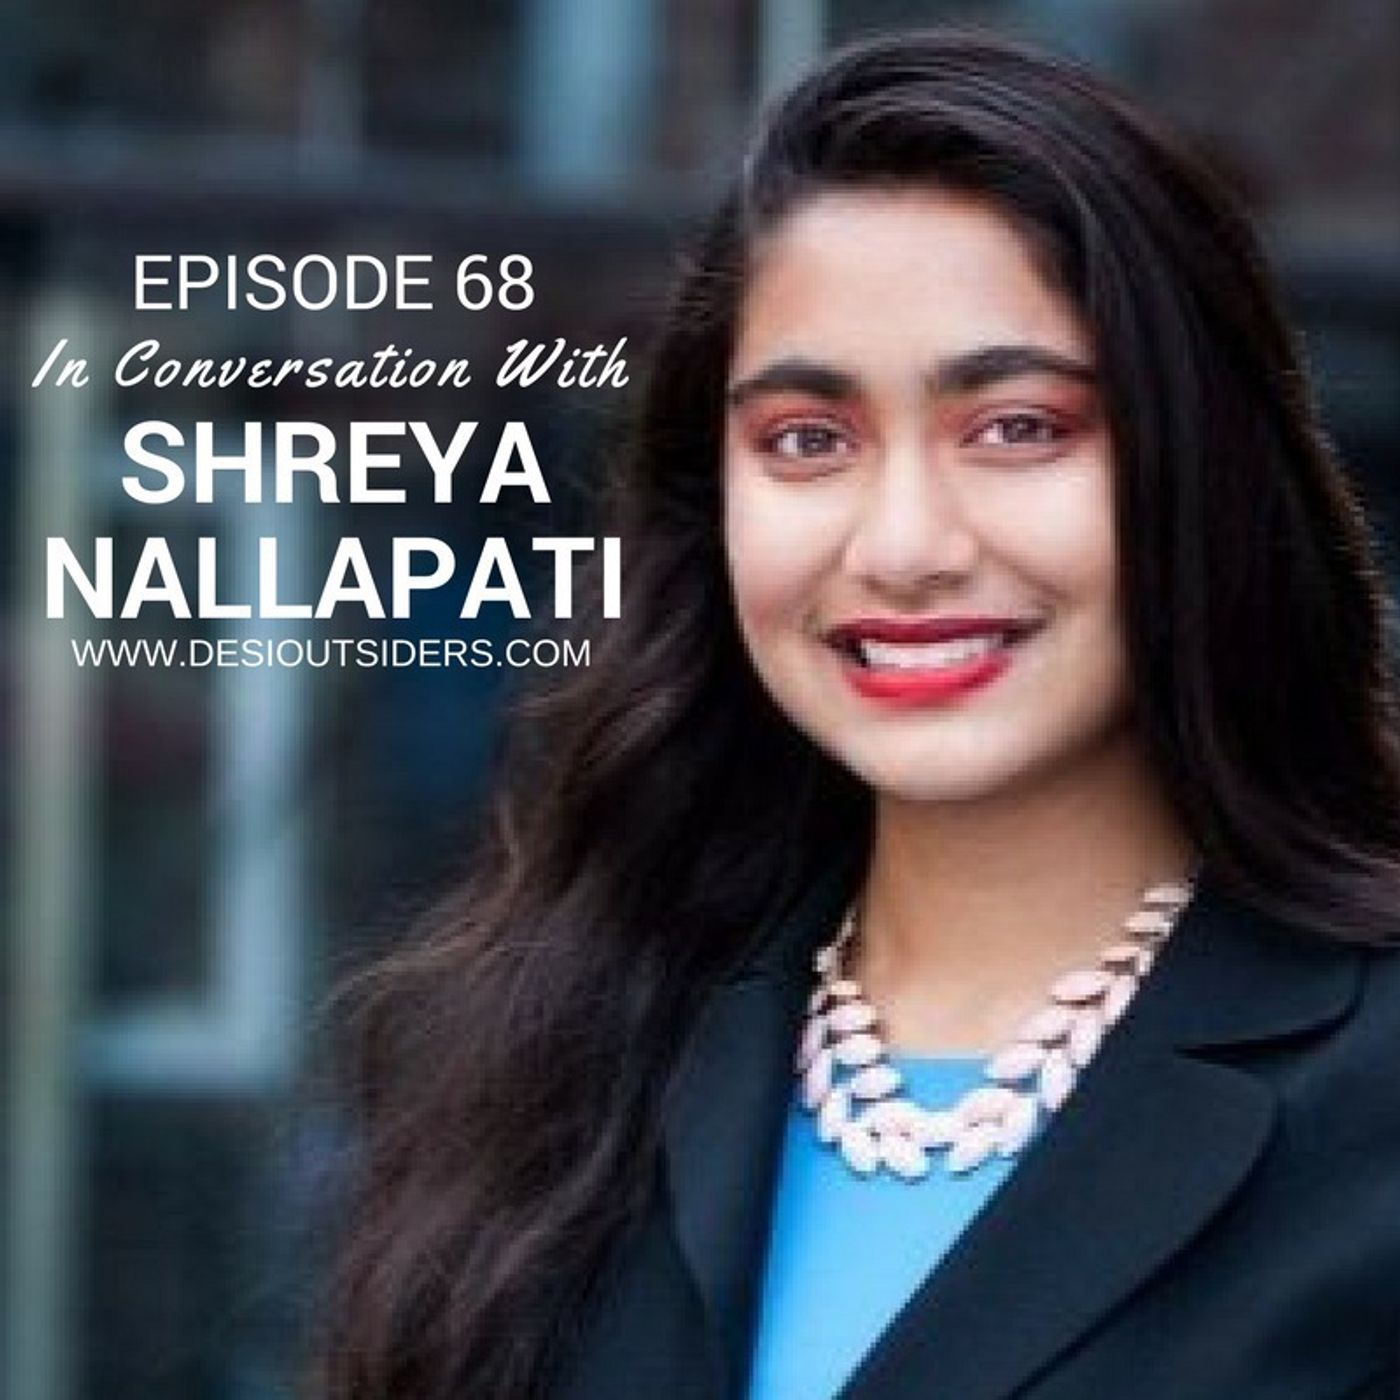 S5 Ep14: Episode 68 - In conversation with Shreya Nallapati